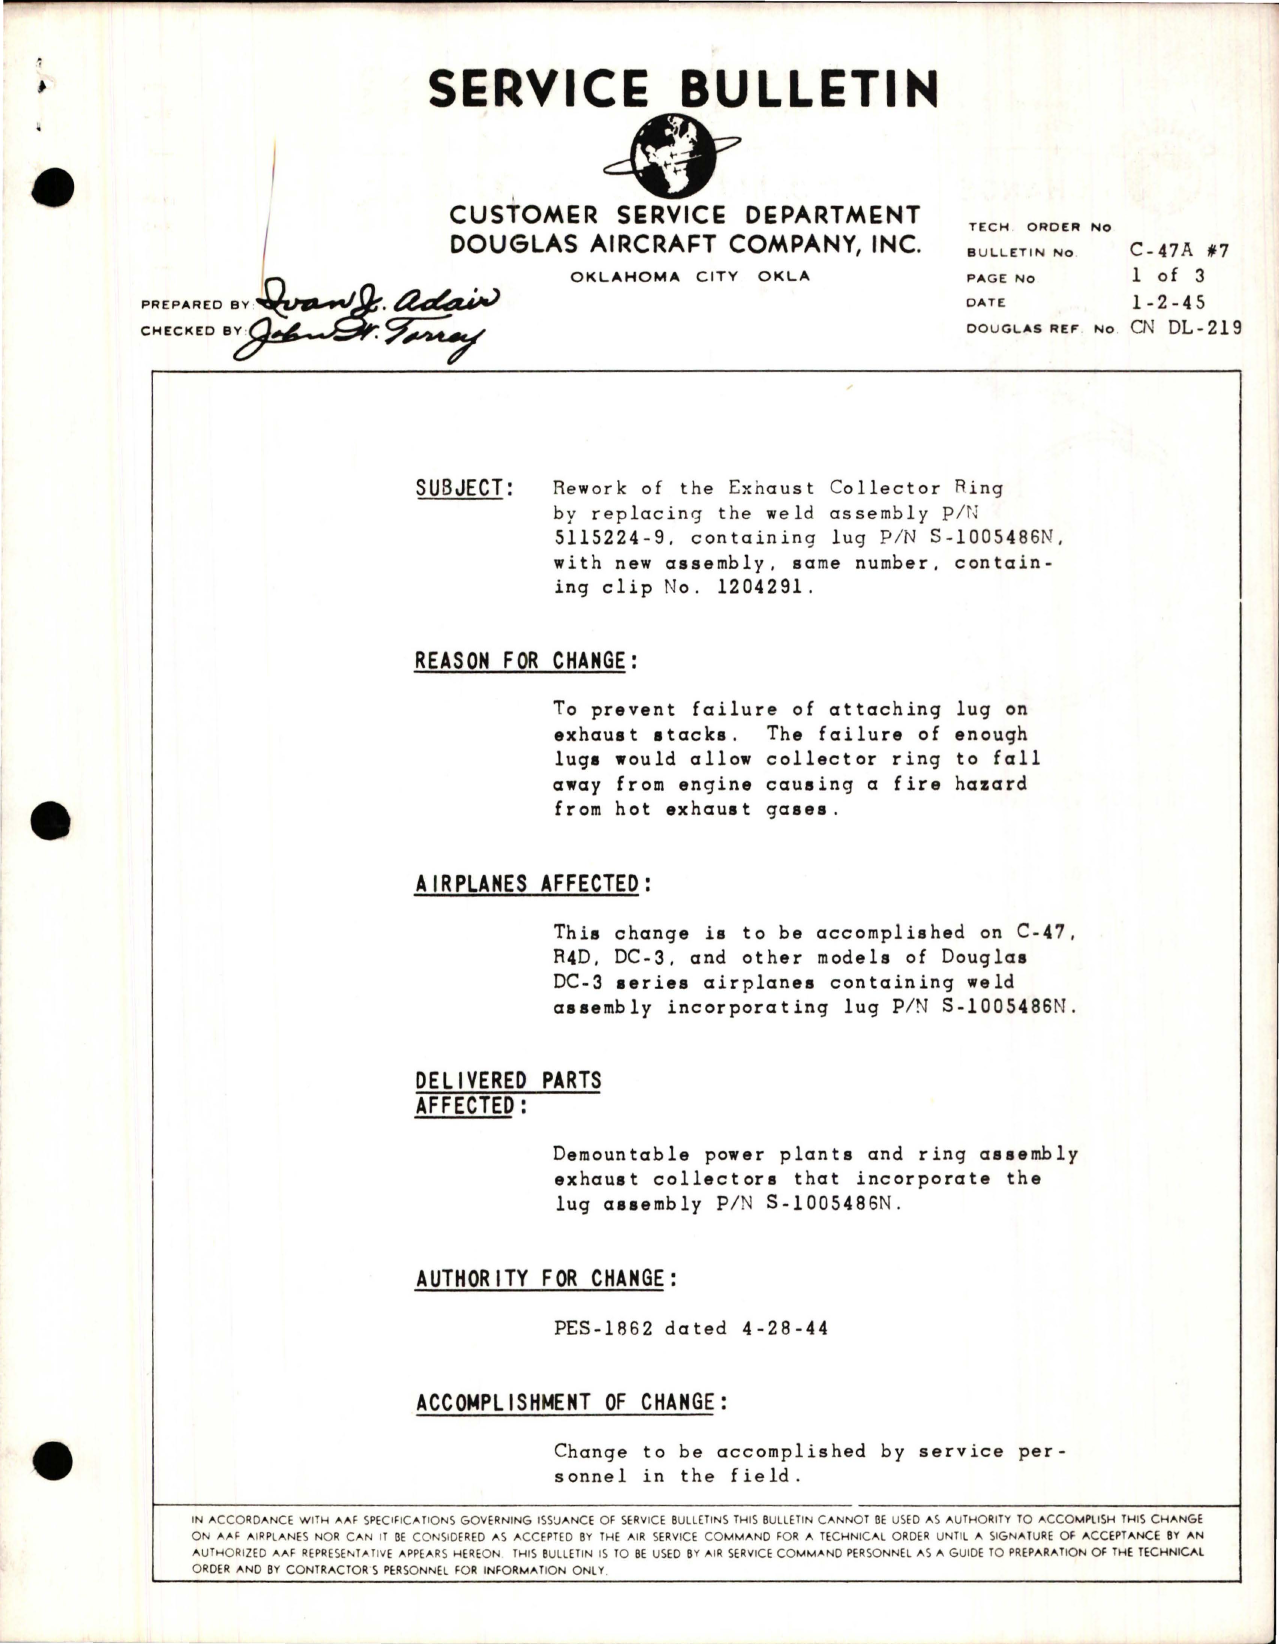 Sample page 1 from AirCorps Library document: Rework of the Exhaust Collector Ring by Replacing the Weld Assembly - Part 5115224-9 - Containing Lug Part S-1005486N